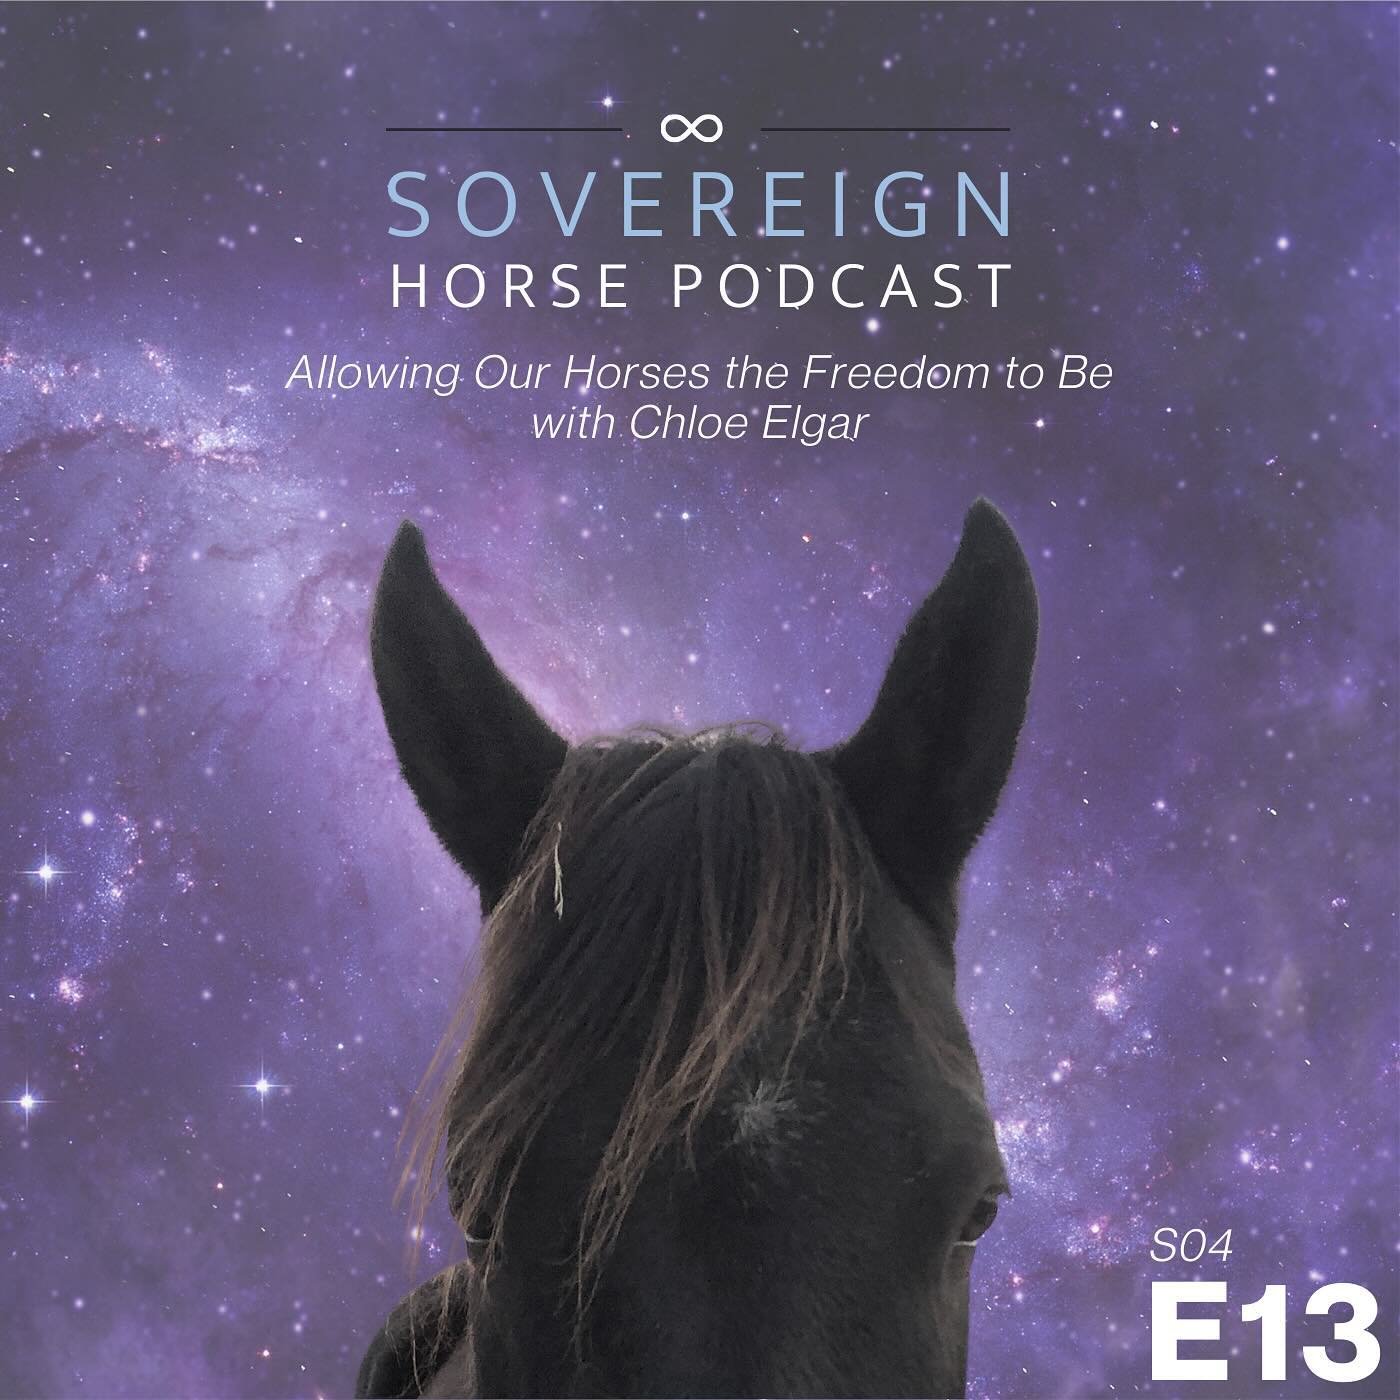 I had such a wonderful experience chatting with Chloe Elgar for our most recent episode of Sovereign Horse. Chloe is a vibe and her perspective on horse guardianship is one I&rsquo;m honoured to share with you all through our podcast. ✨

I loved our 